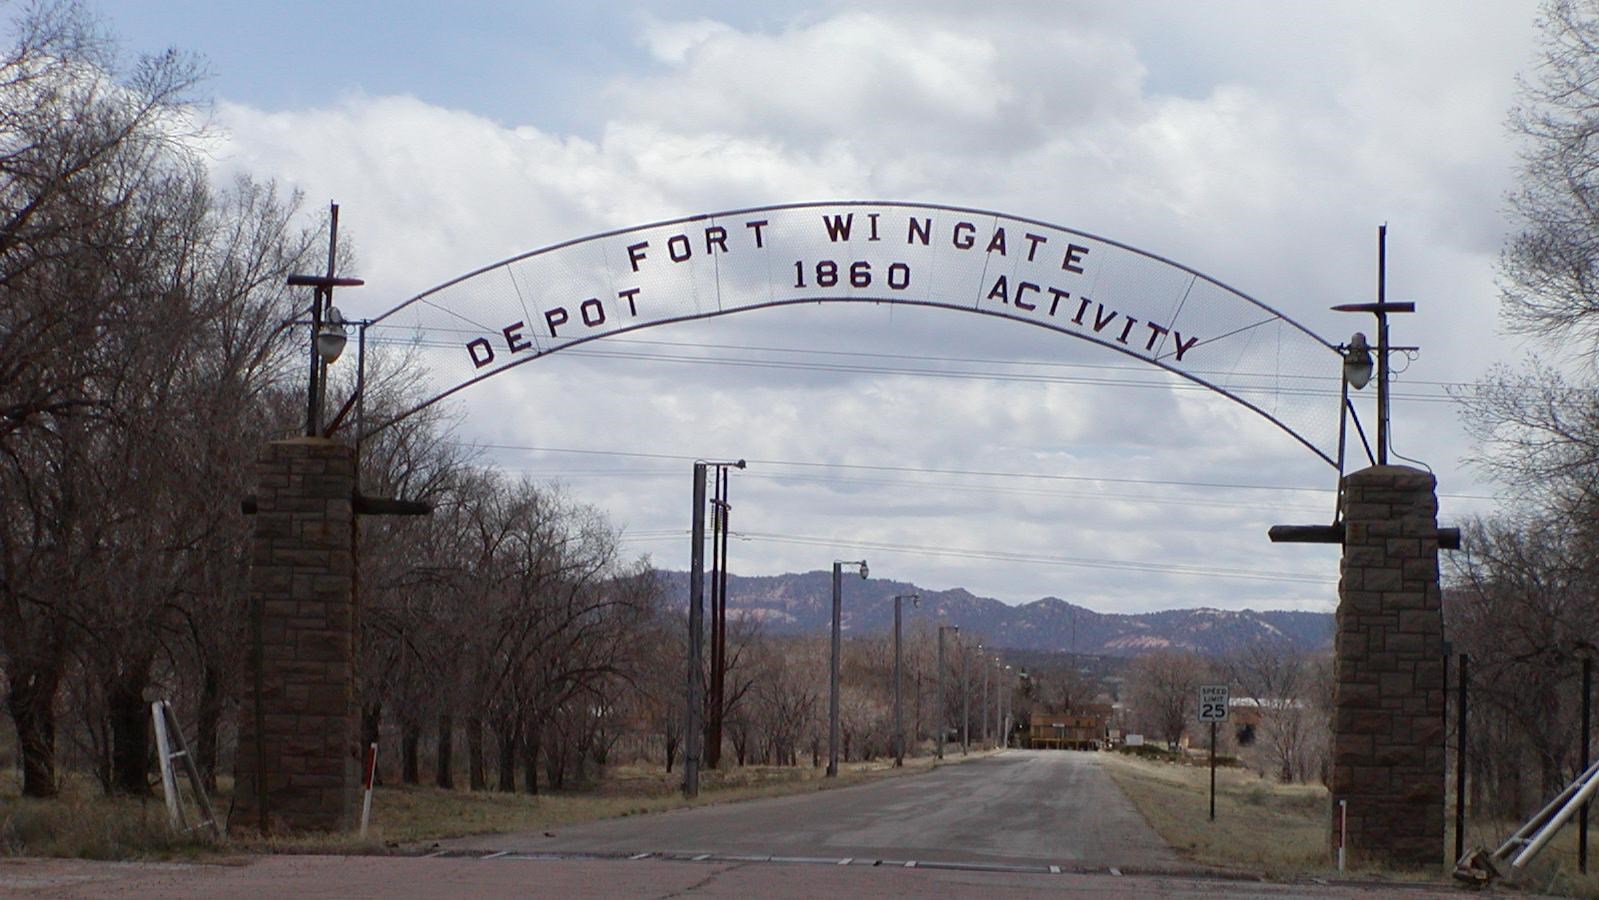 A large arched metal sign reads 